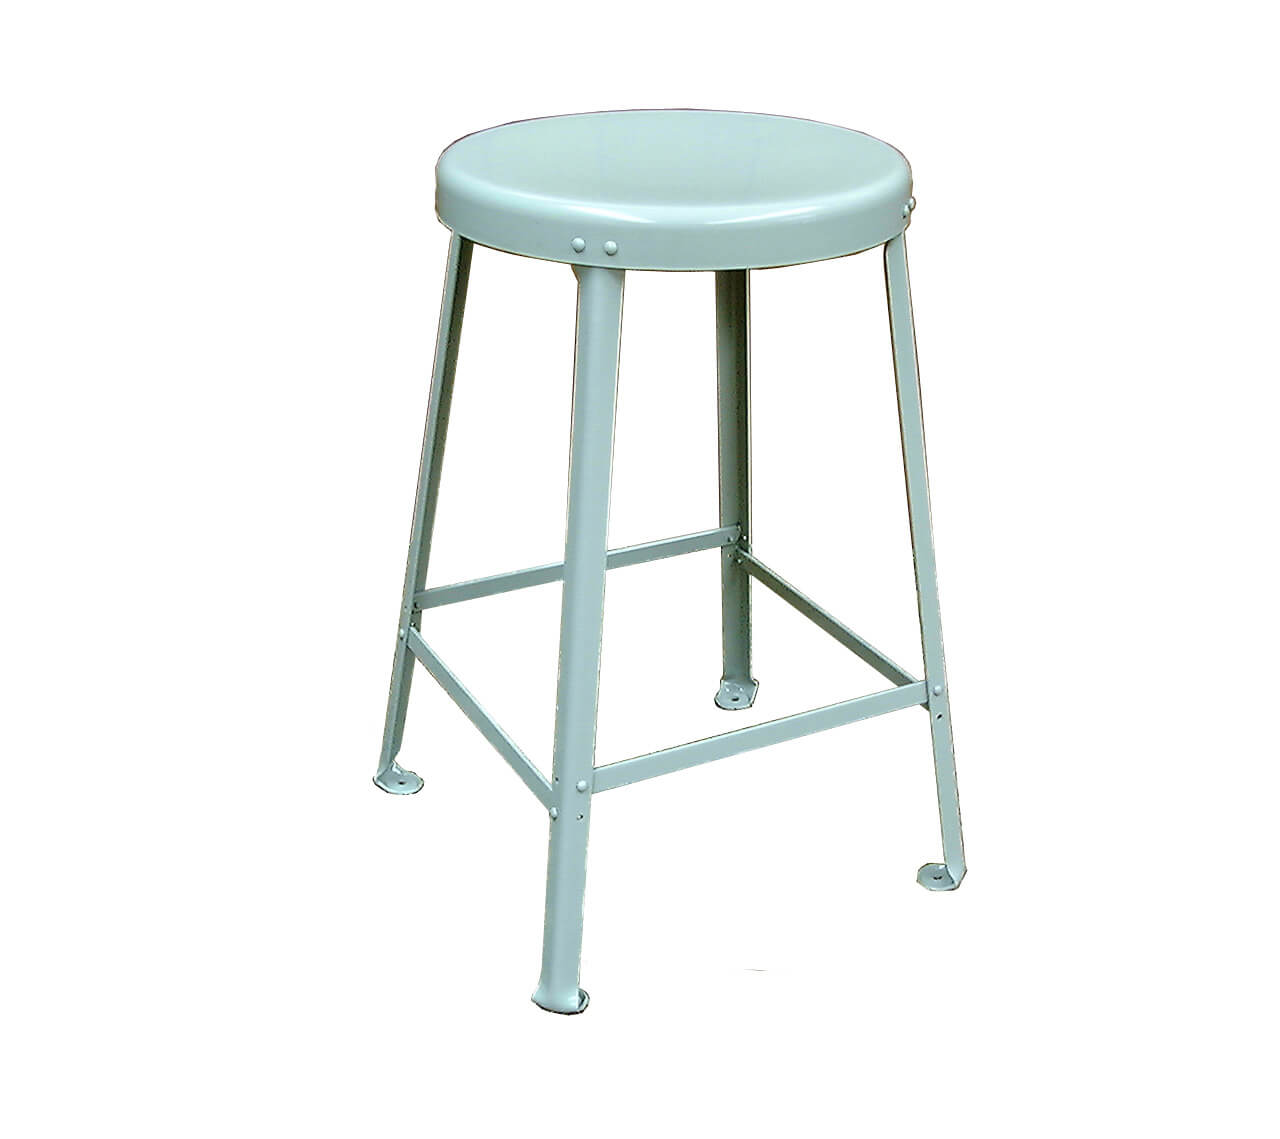 workbench stools ford